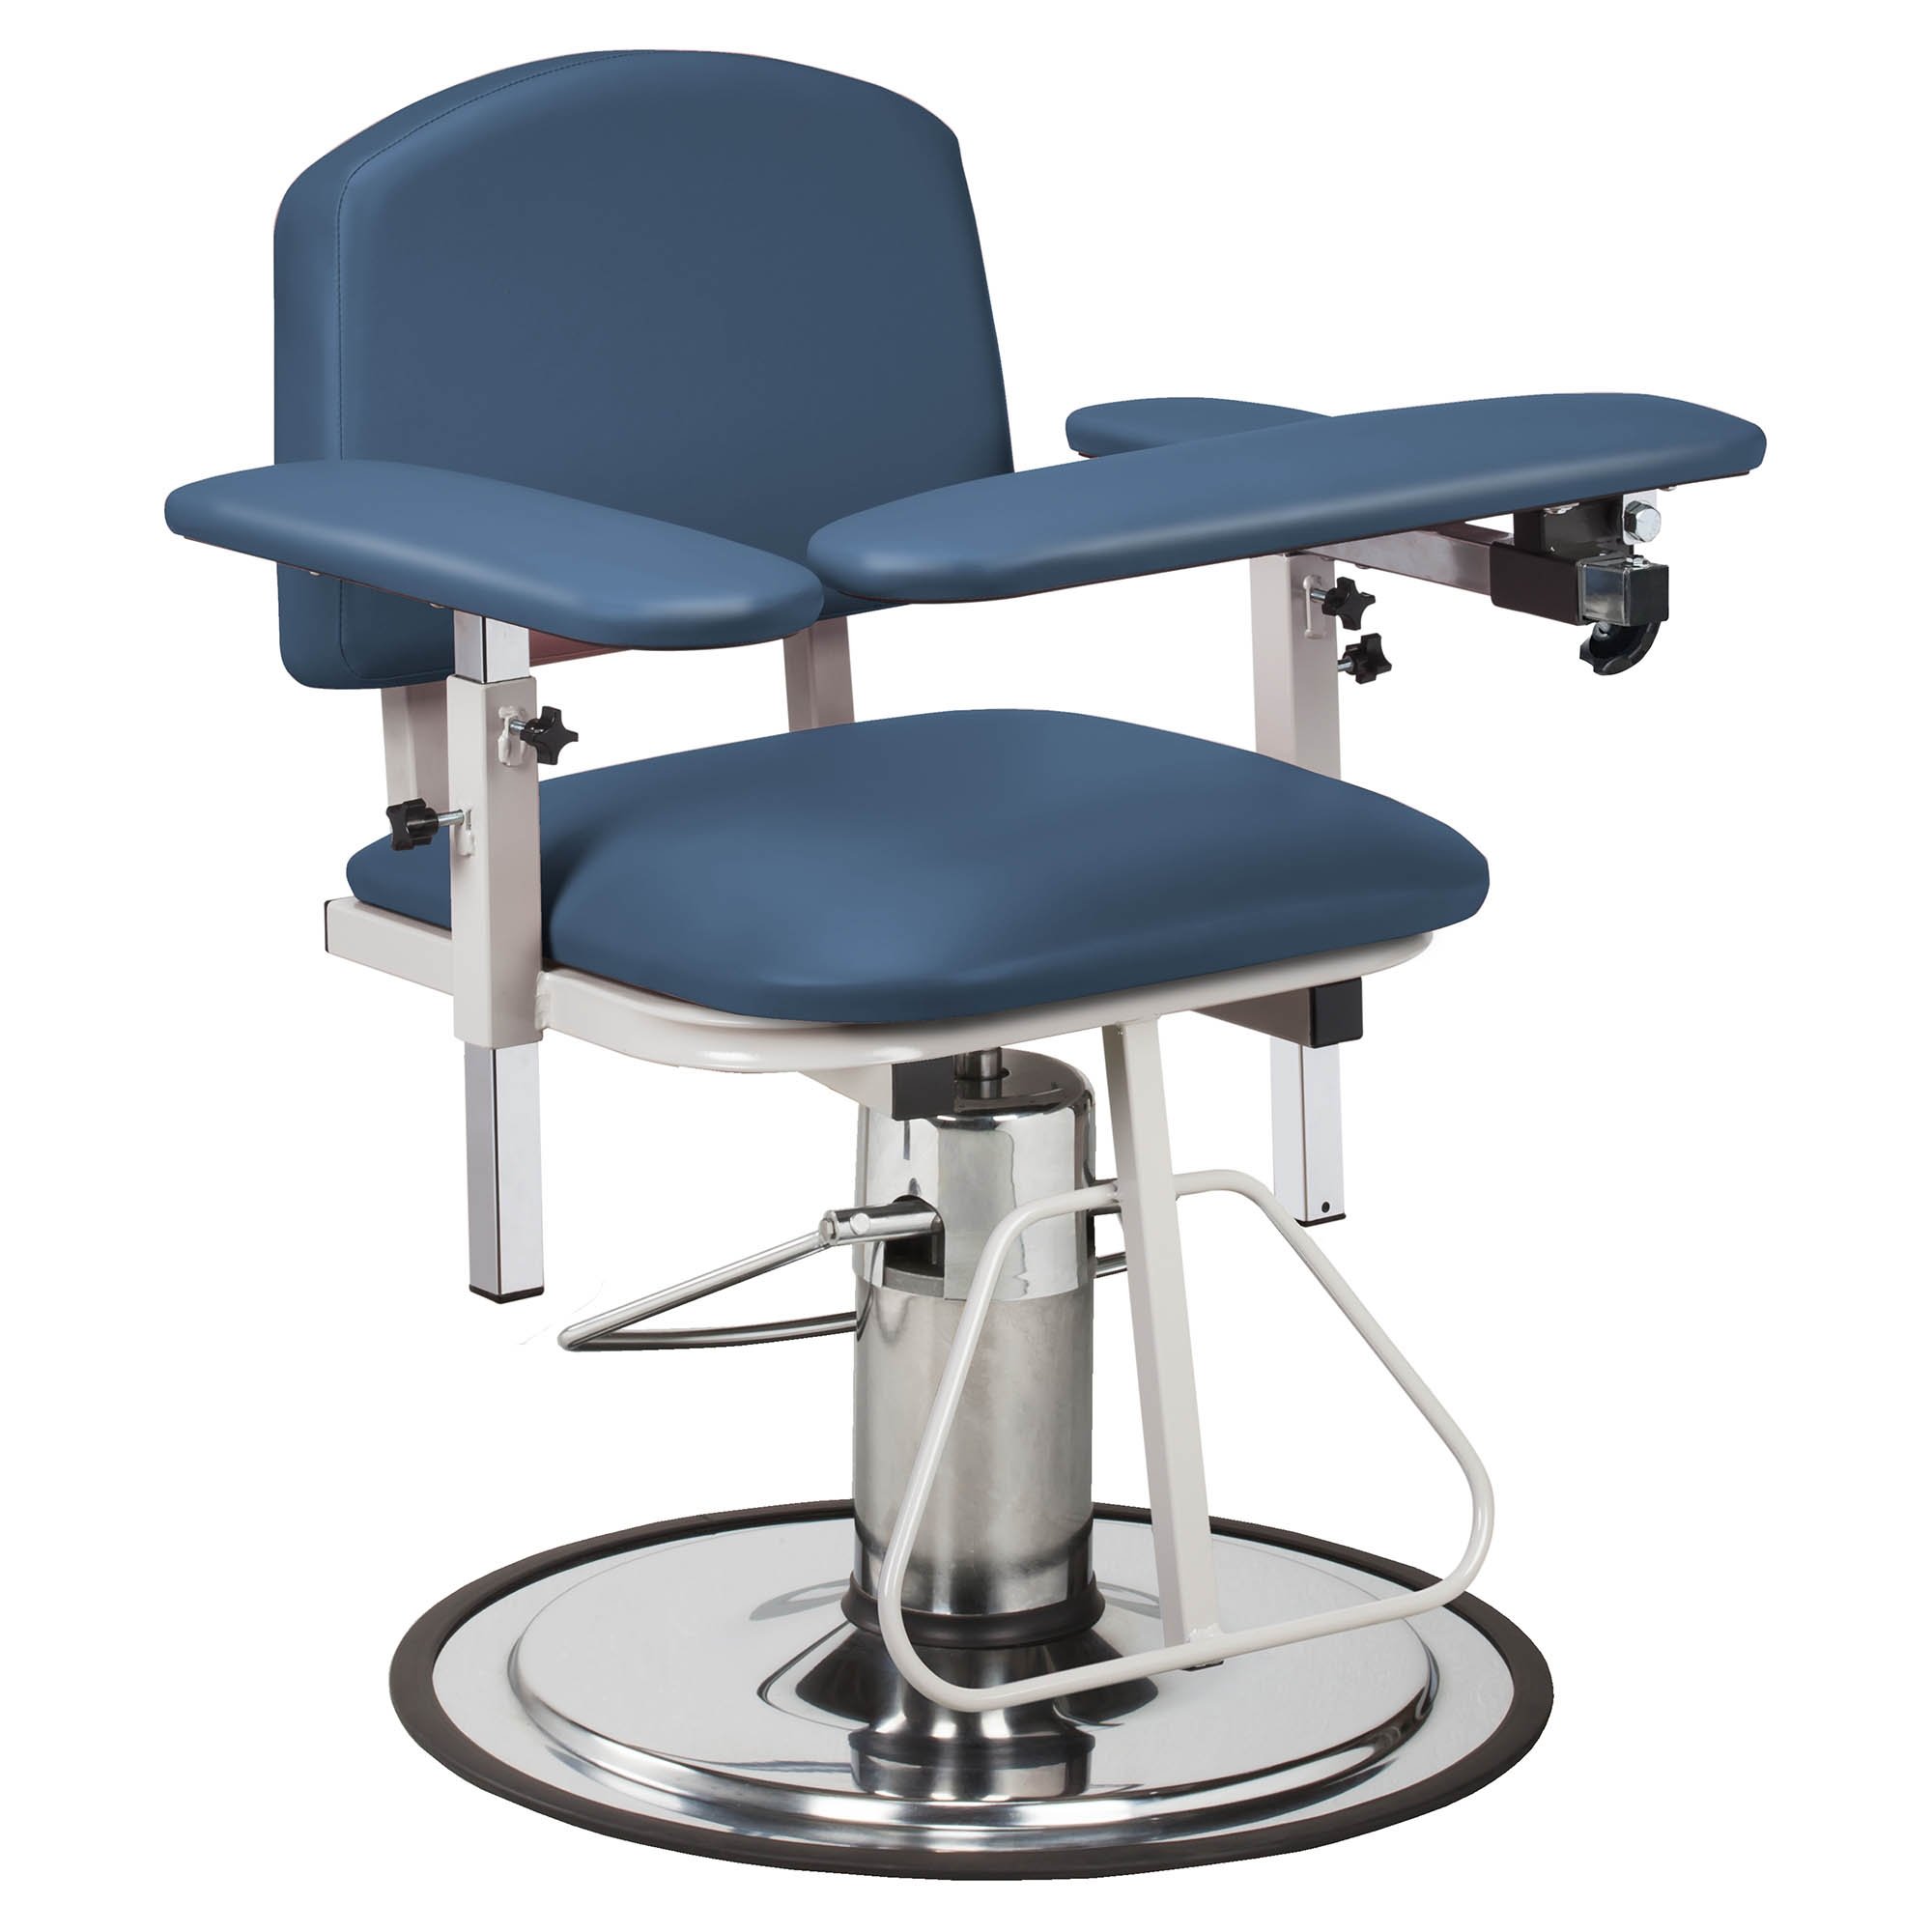 Clinton 6310 H Series Padded Blood Drawing Chair with Padded Arms